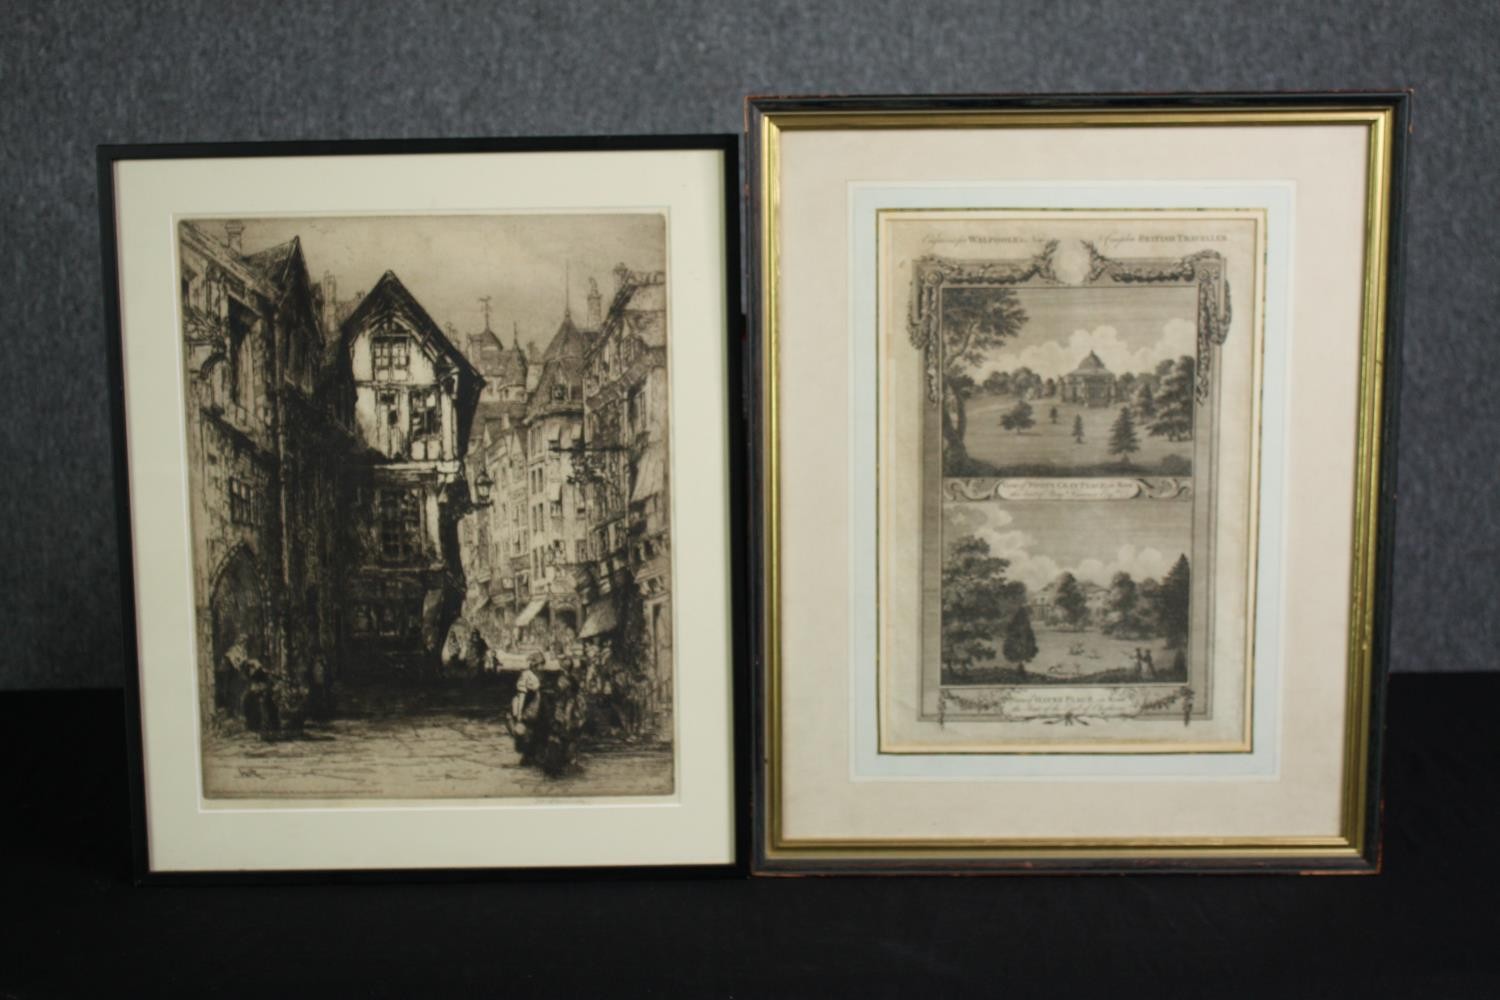 A 19th century framed and glazed signed etching and a 19th century gilt framed and glazed engraving.